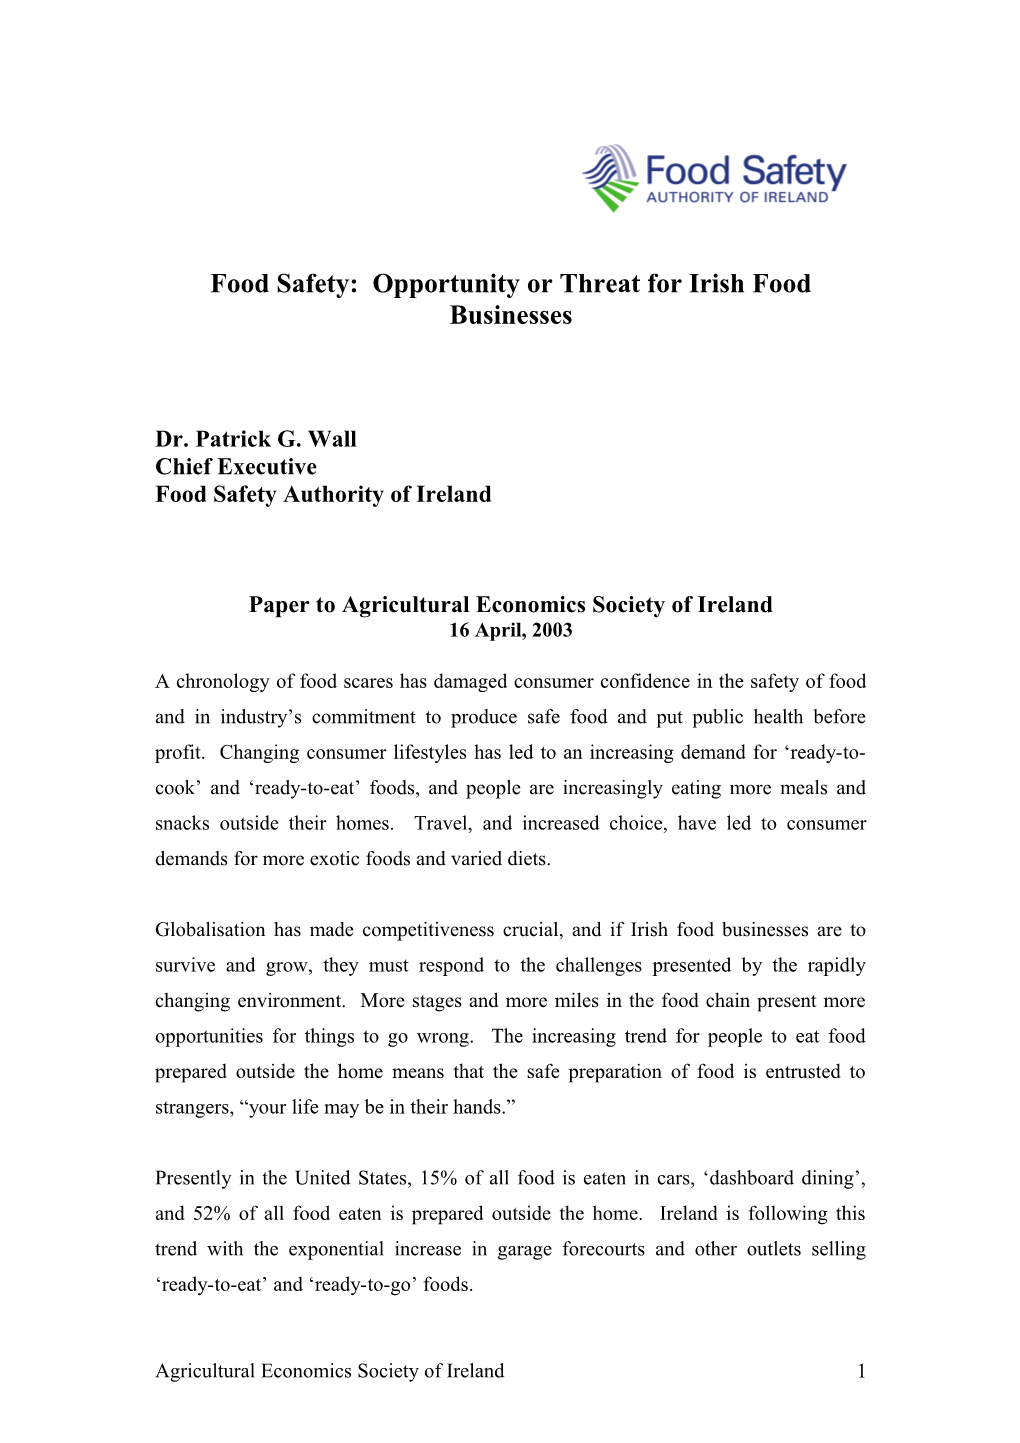 Food Safety: Opportunity on Threat from Irish Food Businesses